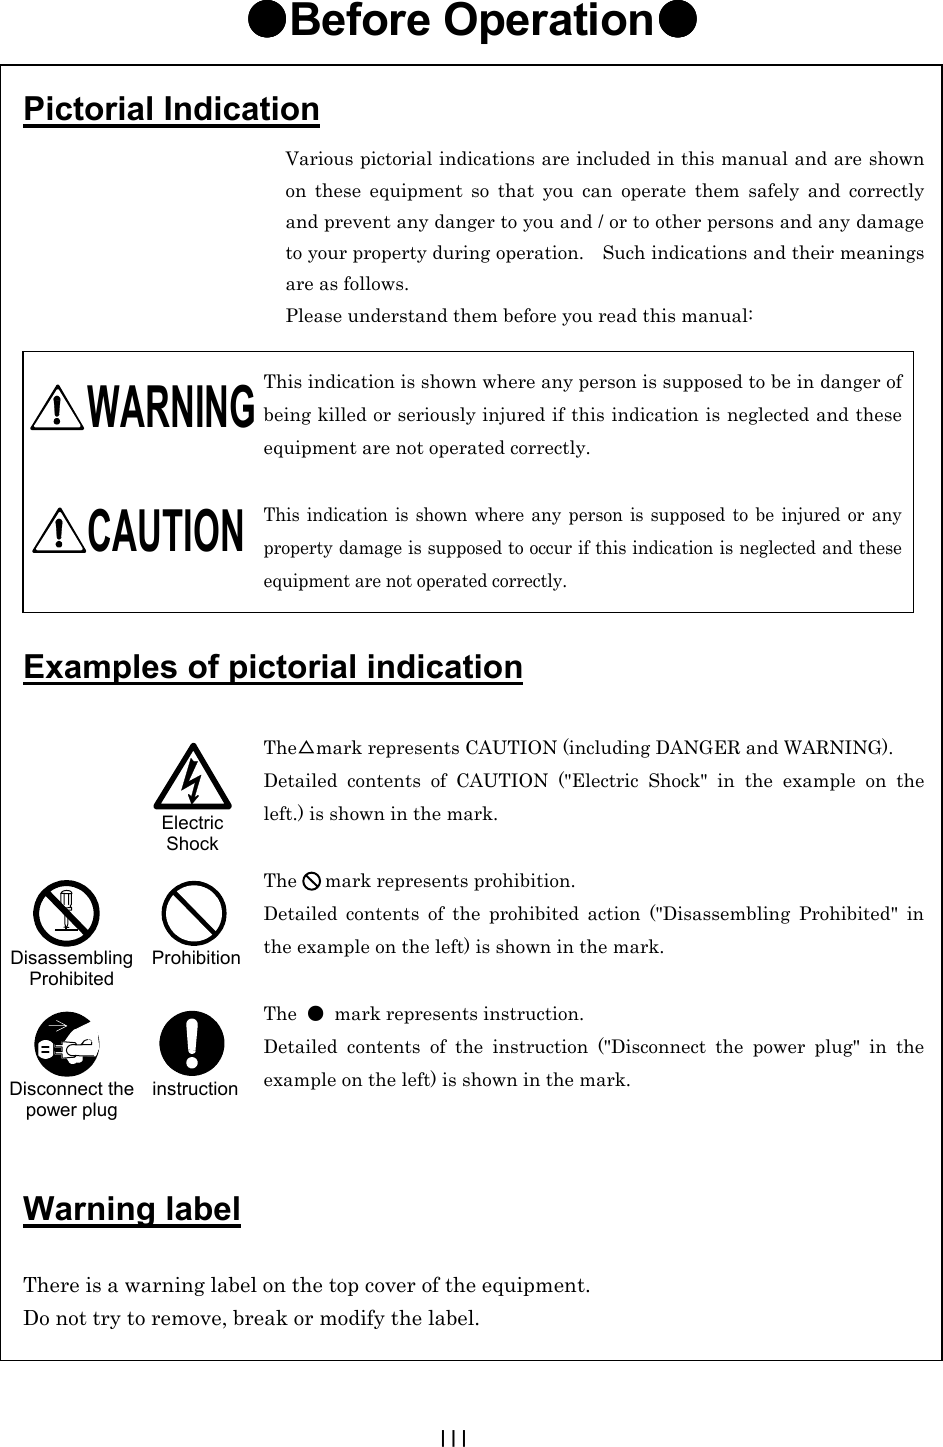 III ●●●●Before Operation●●●●                                             Various pictorial indications are included in this manual and are shown on these equipment so that you can operate them safely and correctly and prevent any danger to you and / or to other persons and any damage to your property during operation.    Such indications and their meanings are as follows. Please understand them before you read this manual:  This indication is shown where any person is supposed to be in danger of being killed or seriously injured if this indication is neglected and these equipment are not operated correctly.  This indication is shown where any person is supposed to be injured or any property damage is supposed to occur if this indication is neglected and these equipment are not operated correctly.     The△mark represents CAUTION (including DANGER and WARNING). Detailed contents of CAUTION (&quot;Electric Shock&quot; in the example on the left.) is shown in the mark.  The   mark represents prohibition. Detailed contents of the prohibited action (&quot;Disassembling Prohibited&quot; in the example on the left) is shown in the mark.  The  ●  mark represents instruction. Detailed contents of the instruction (&quot;Disconnect the power plug&quot; in the example on the left) is shown in the mark. Pictorial Indication WARNING CAUTION Examples of pictorial indication Warning label  There is a warning label on the top cover of the equipment. Do not try to remove, break or modify the label. Electric Shock Disassembling Prohibited Prohibition Disconnect the power plug instruction  